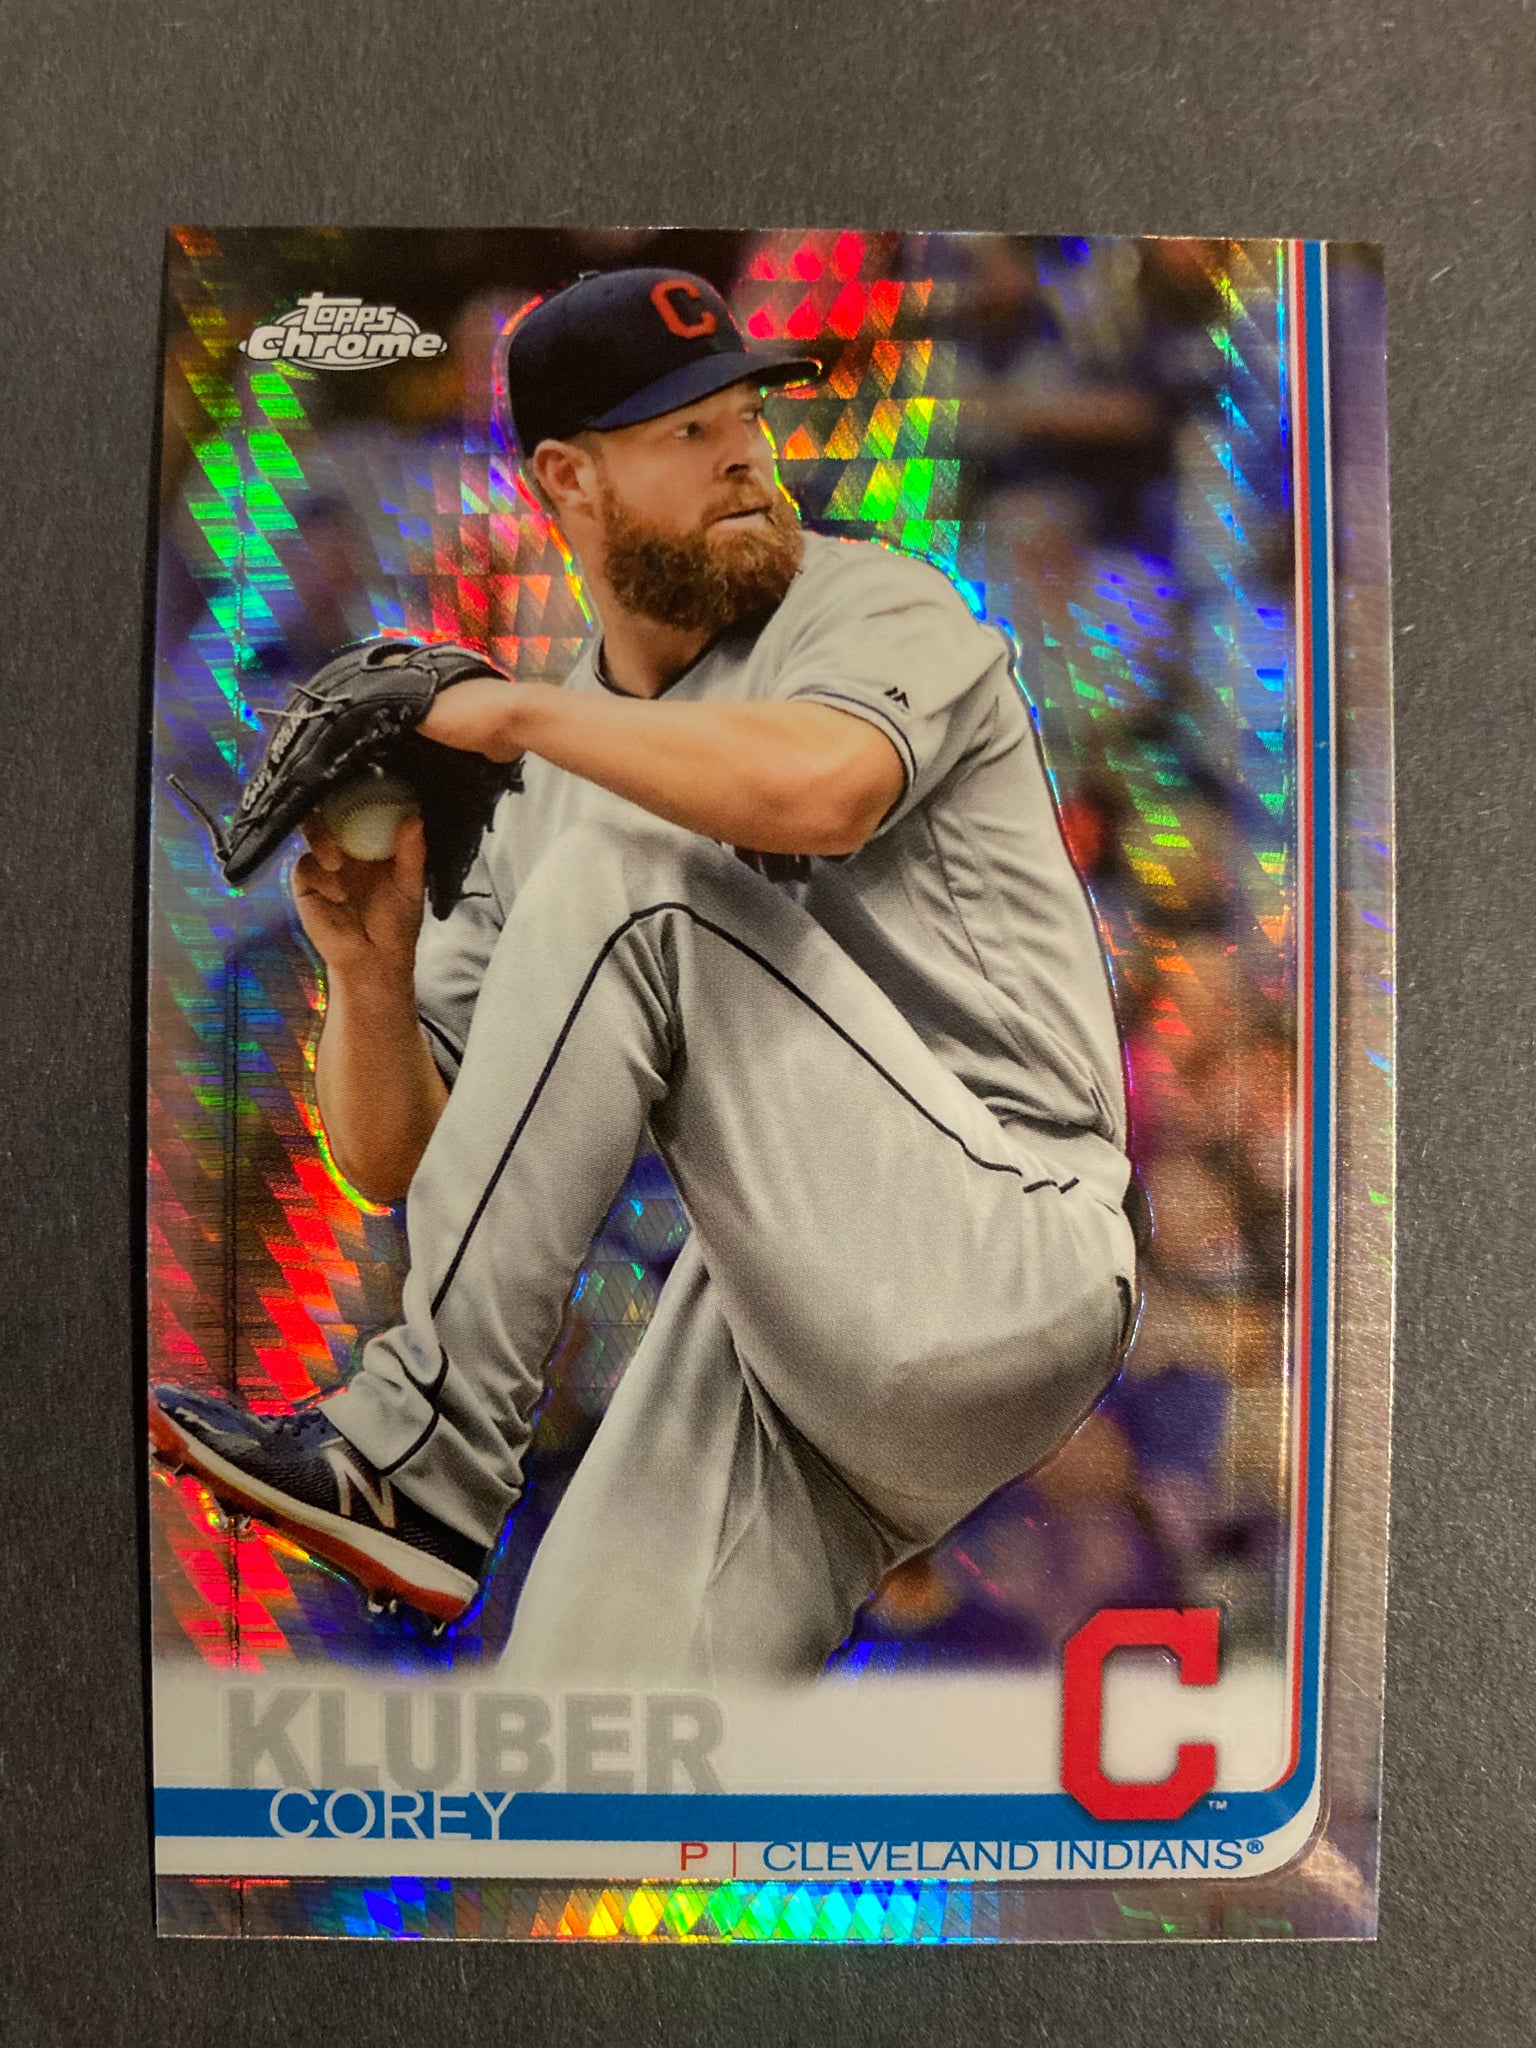 Corey Kluber Topps Chrome #188 Cleveland Indians Xfractor MLB